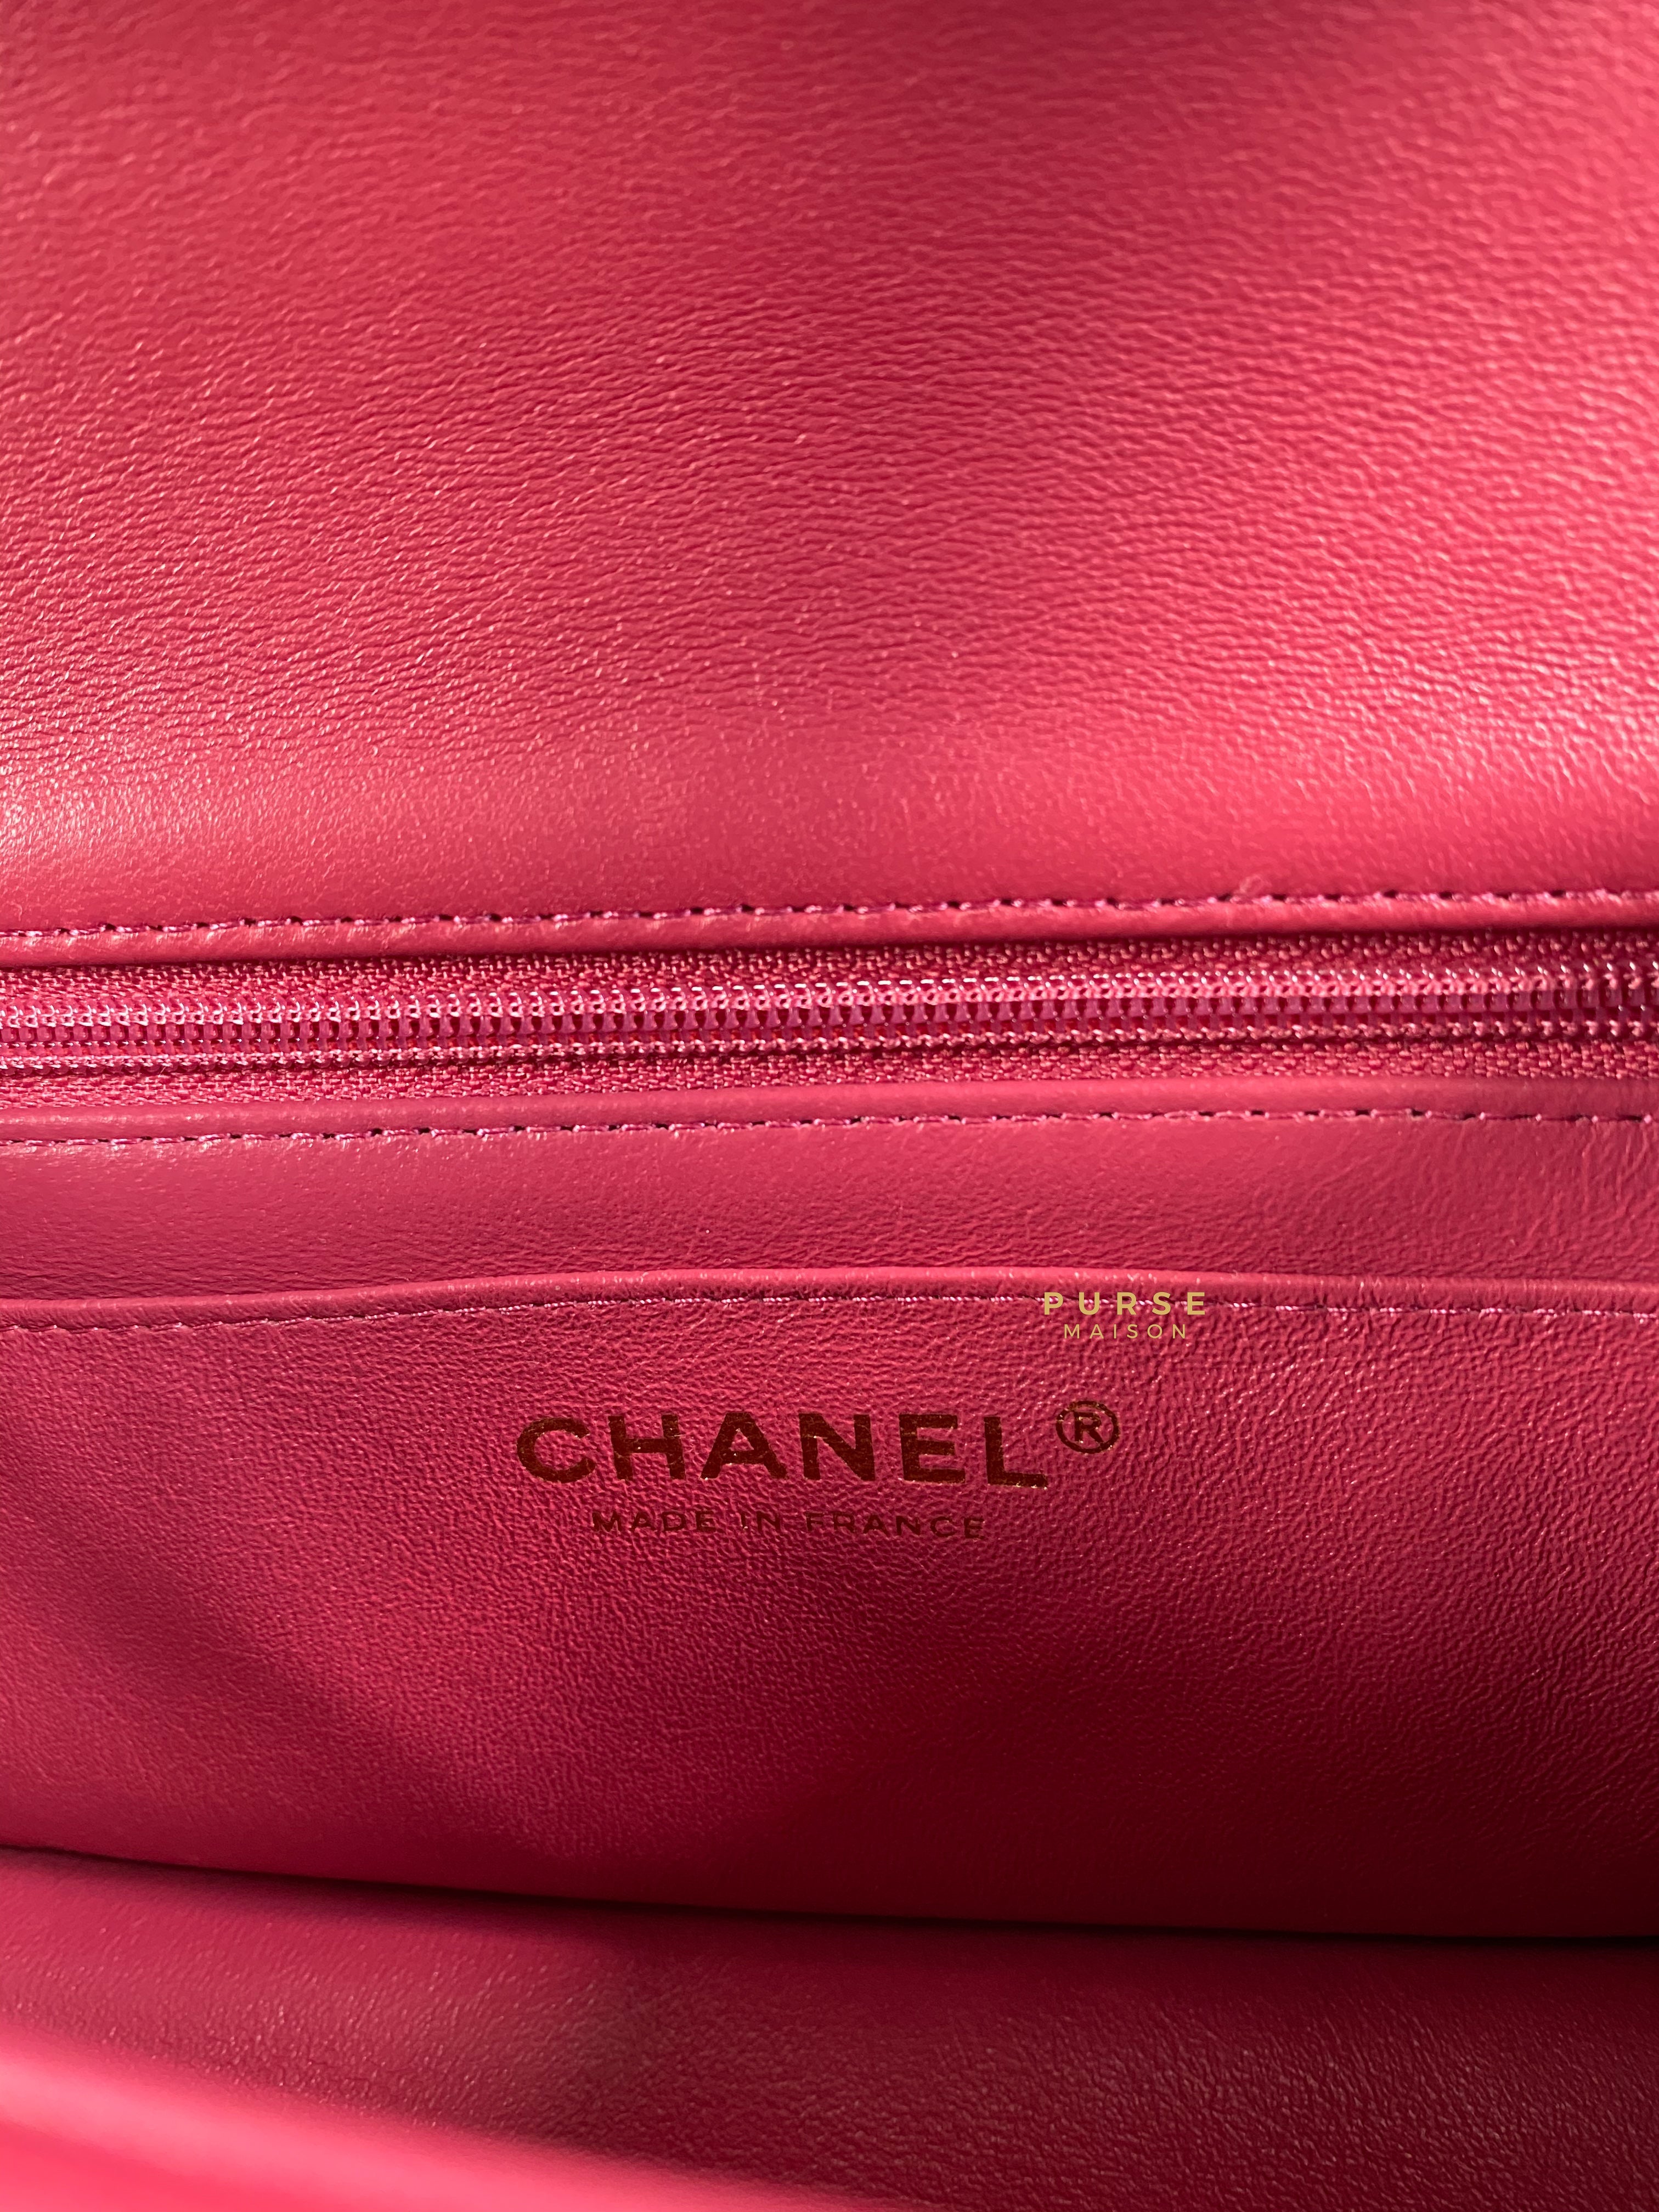 Chanel Mini Rectangle Top Handle 21A Dark Pink Lambskin in Aged Gold Hardware (Microchip) | Purse Maison Luxury Bags Shop